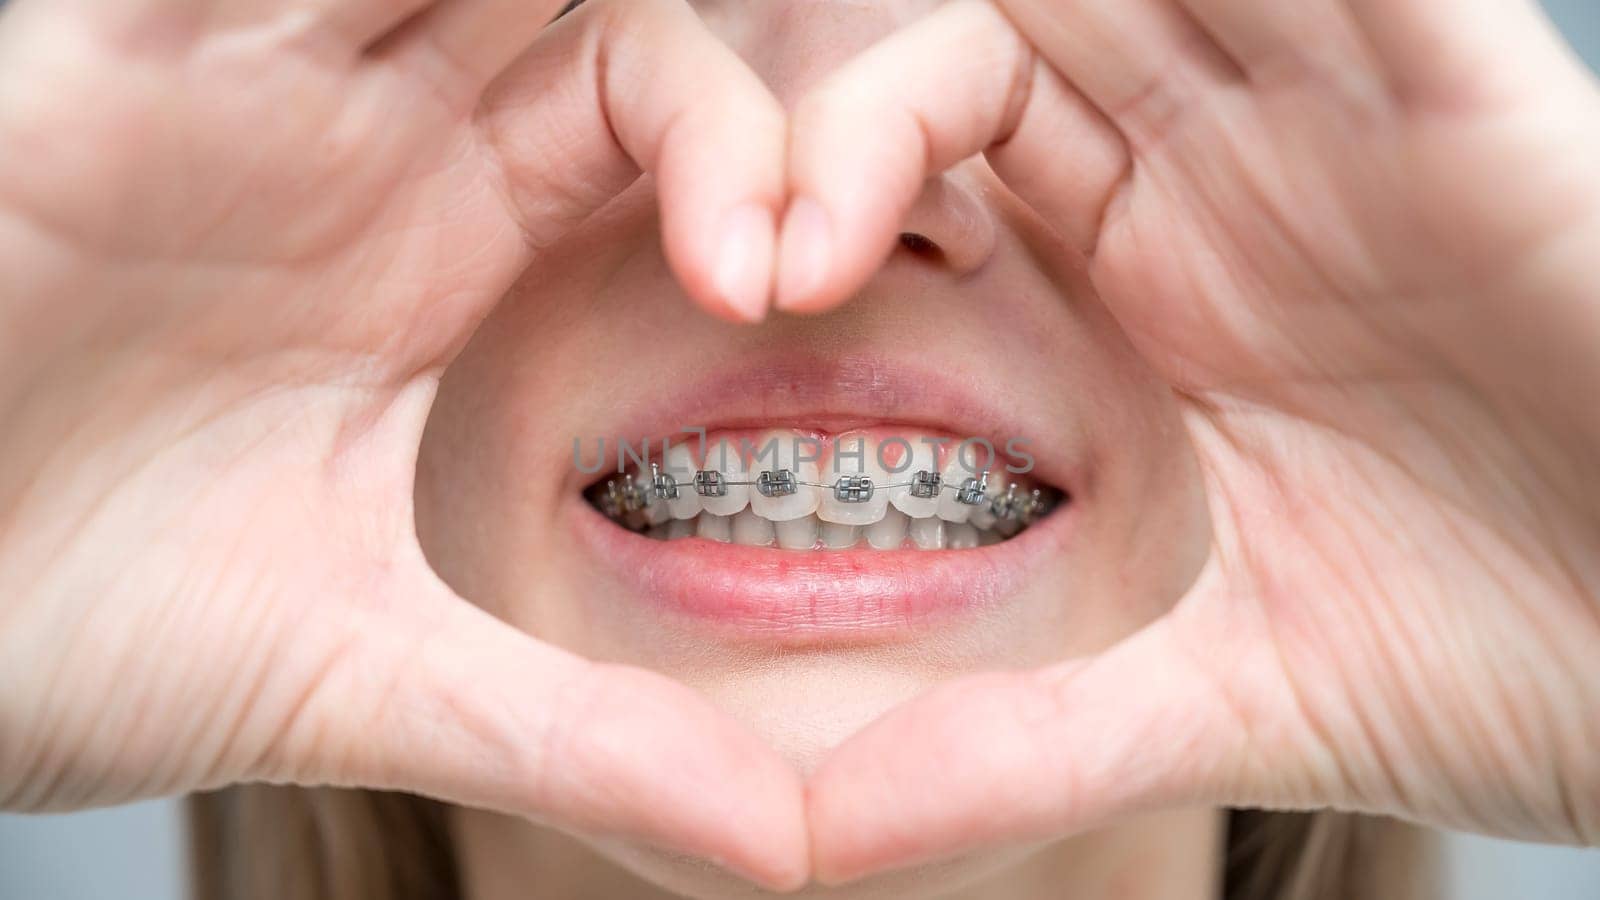 Caucasian woman in braces holding fingers in the shape of a heart. by mrwed54